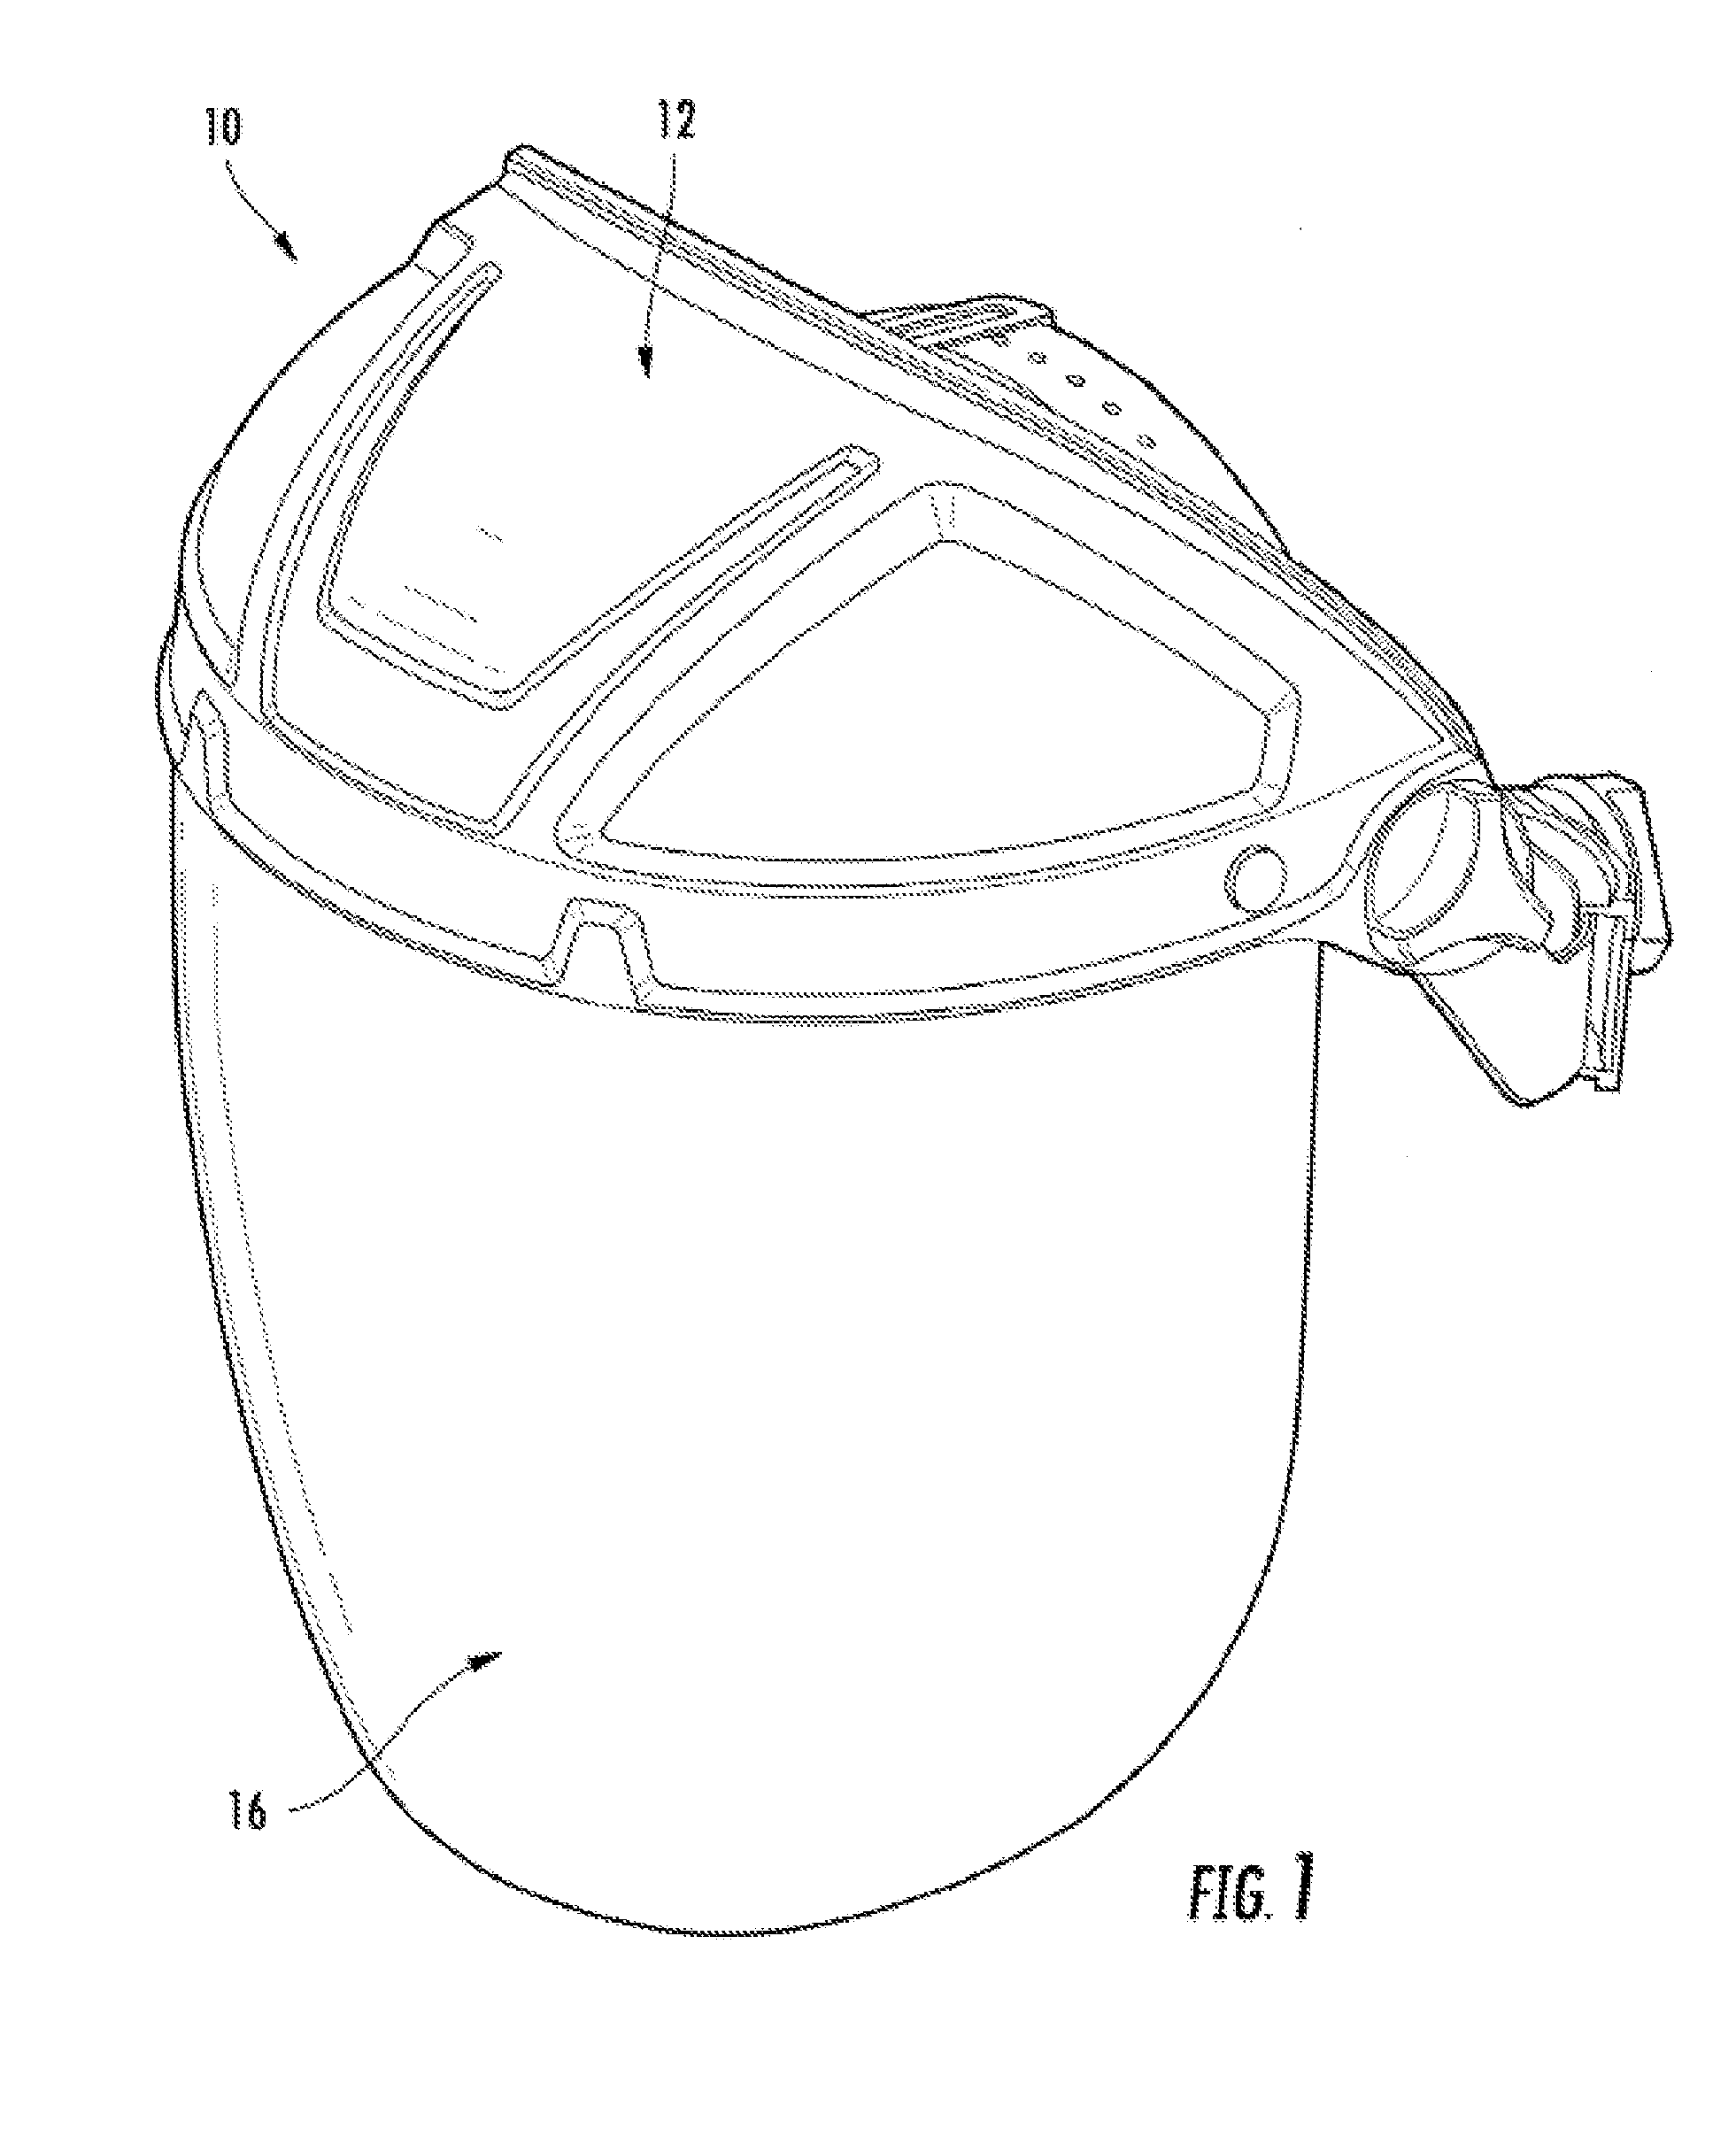 Electric-arc resistant face shield or lens including ir-blocking inorganic nanoparticles